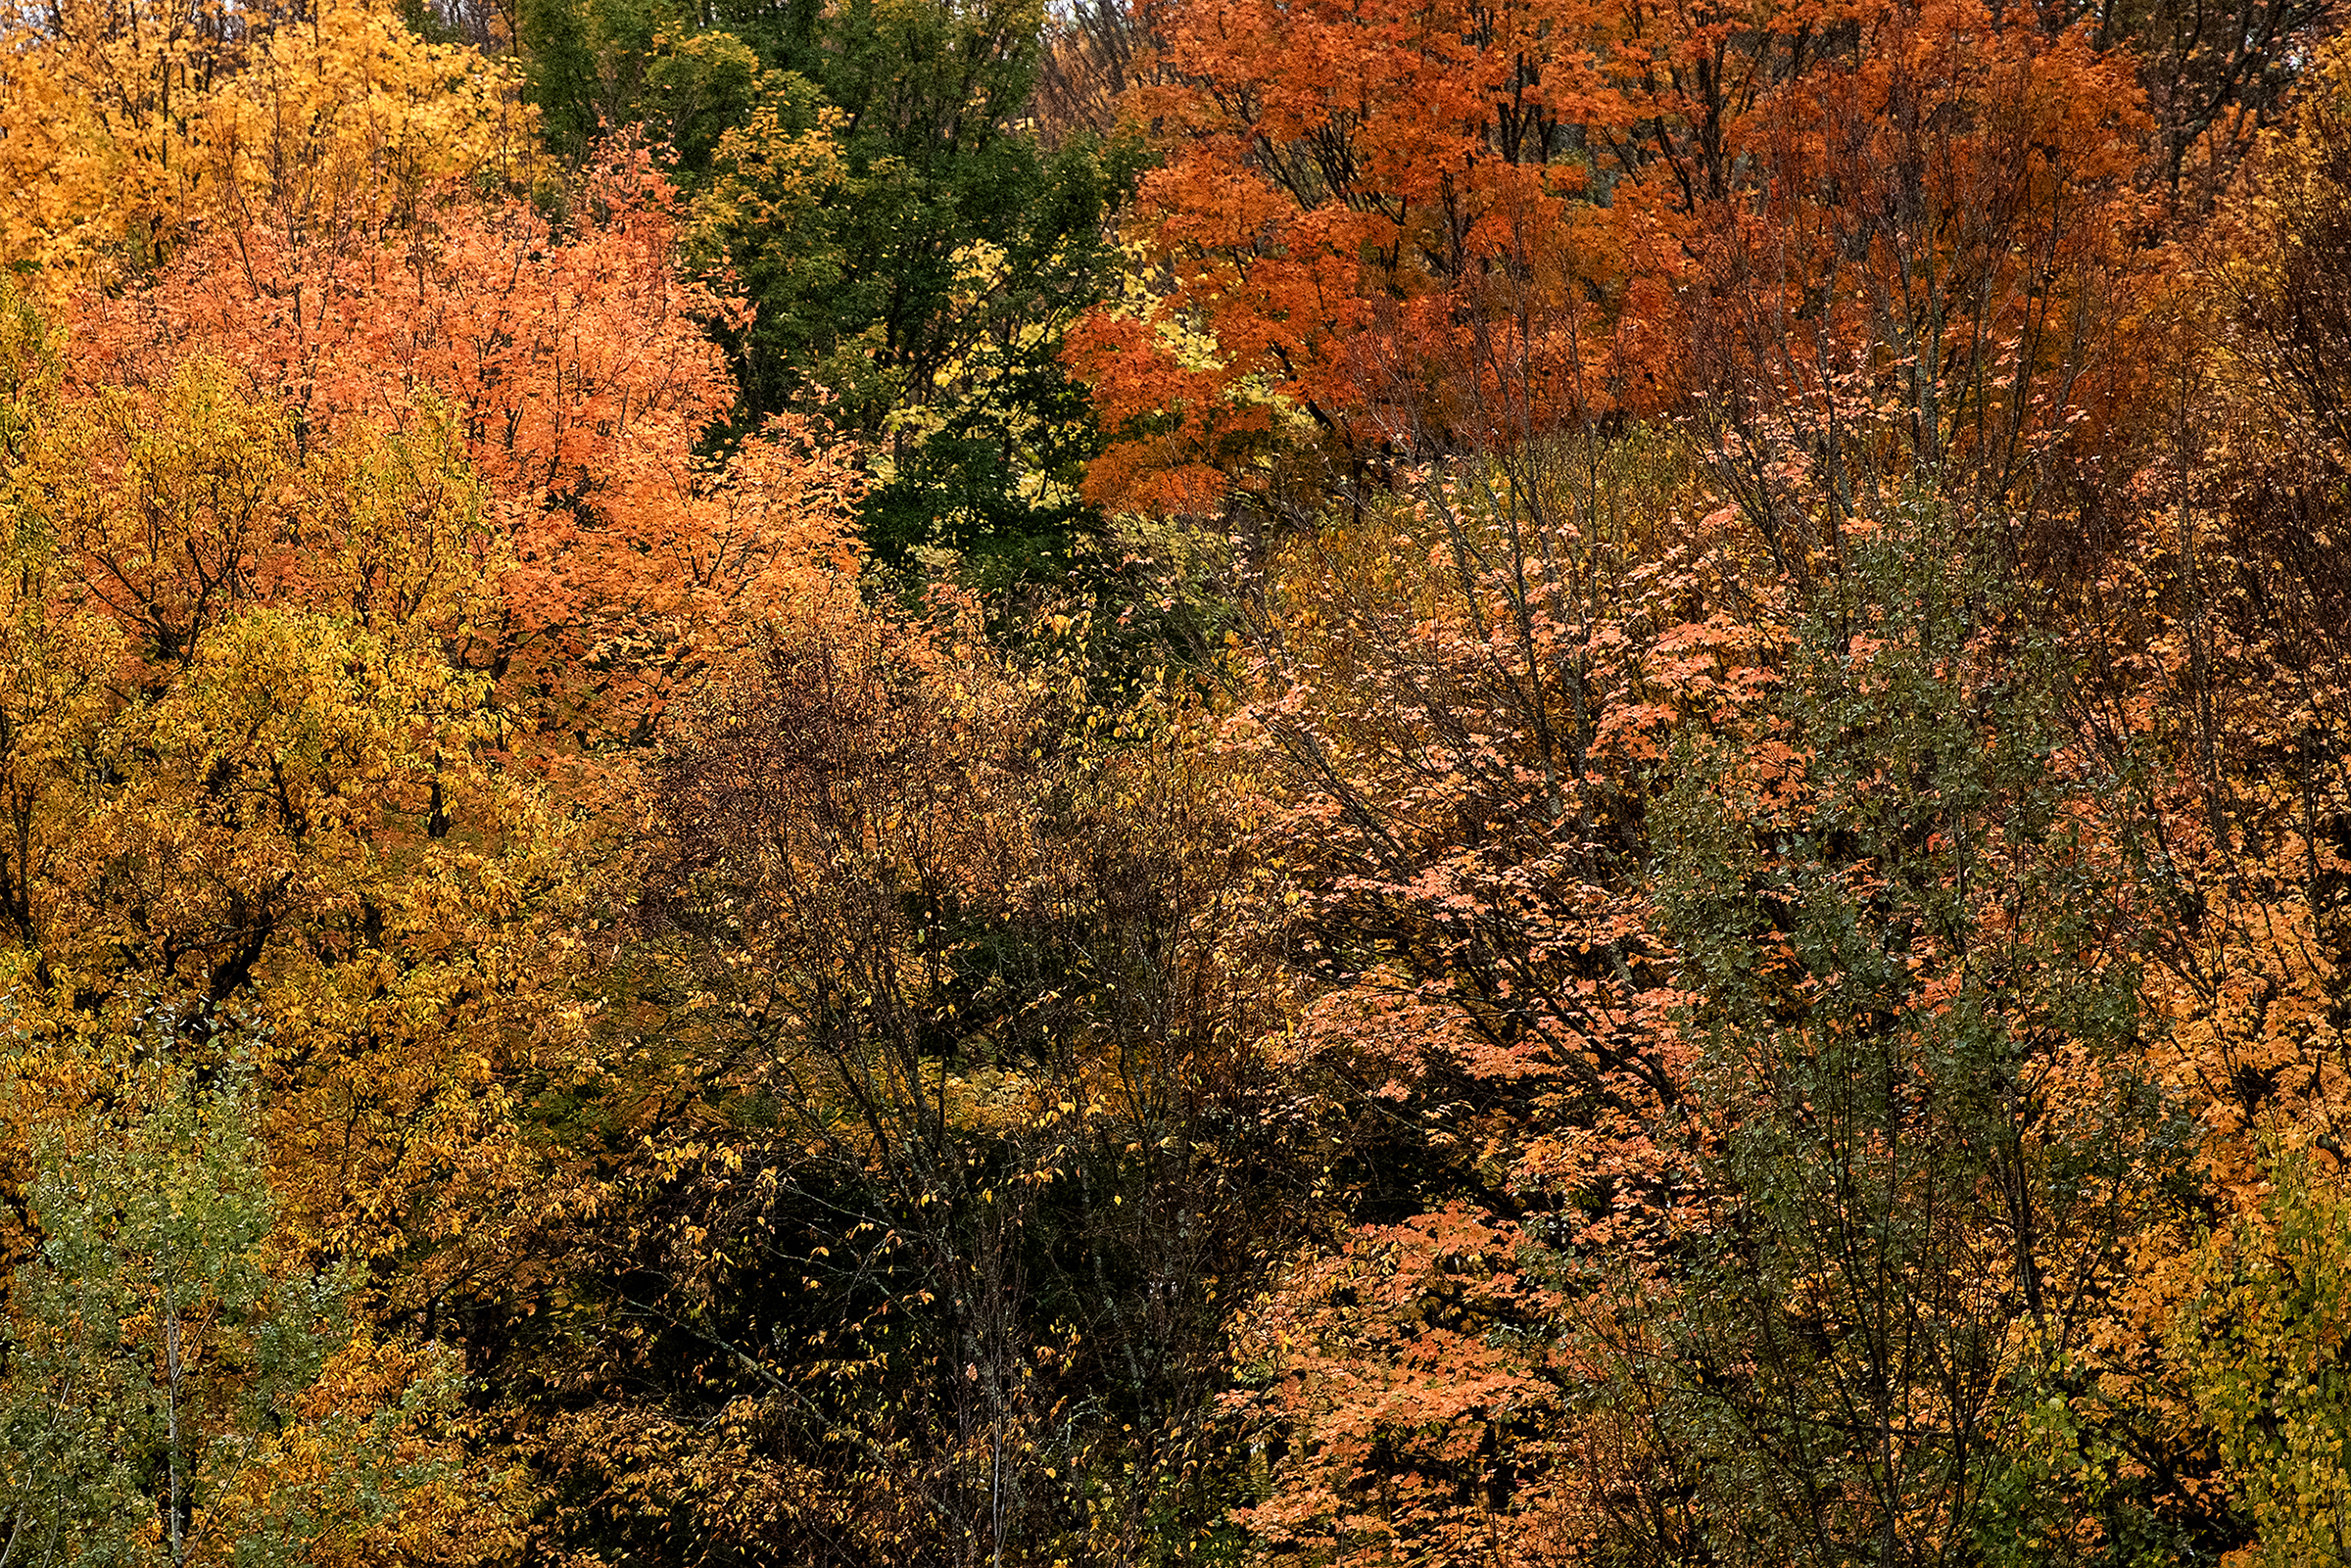 Rain and cooler temperatures could have saved fall foliage season in Wisconsin